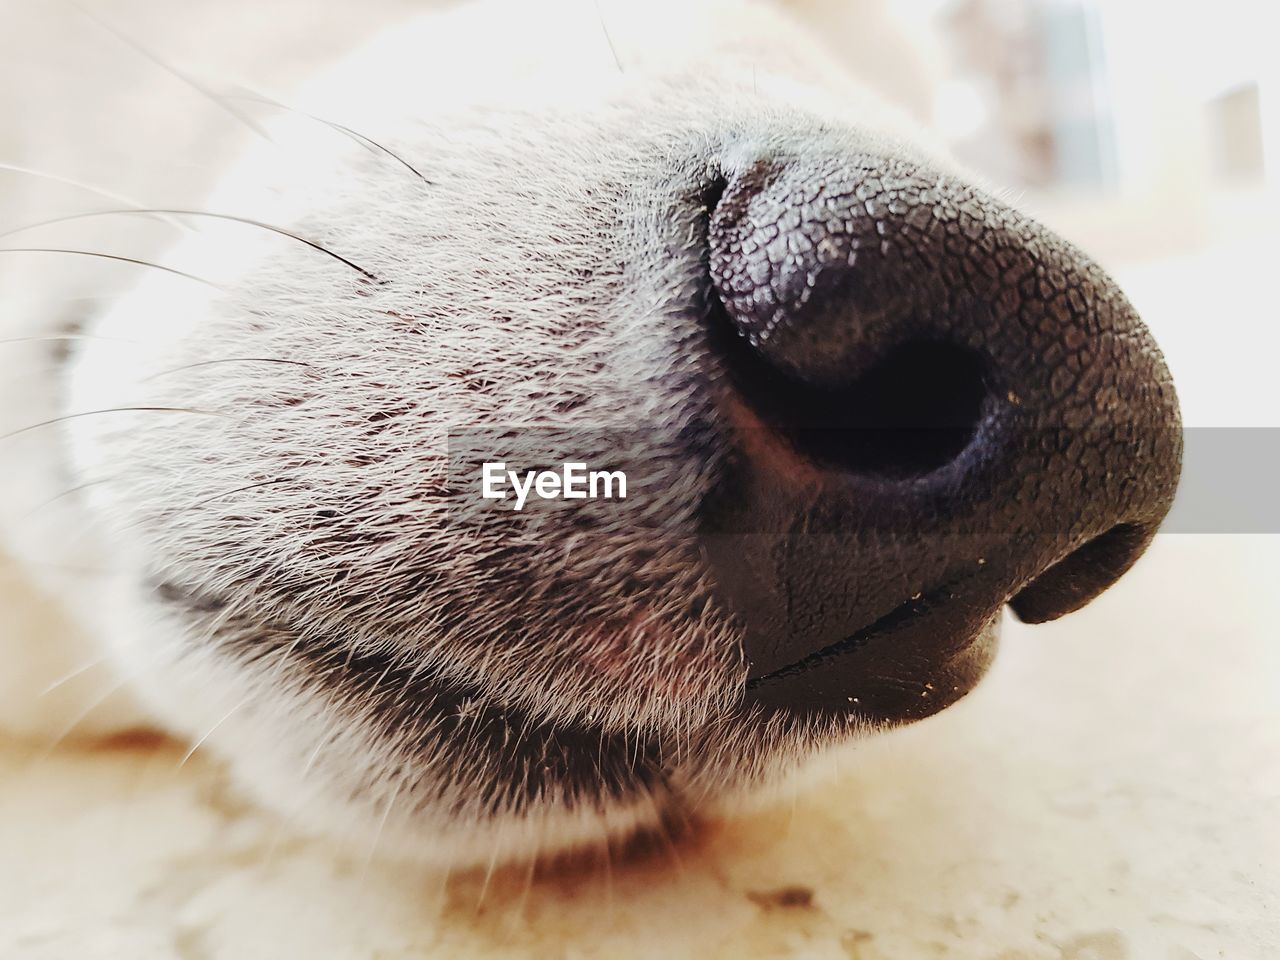 CLOSE-UP OF DOG WITH MOUTH OPEN